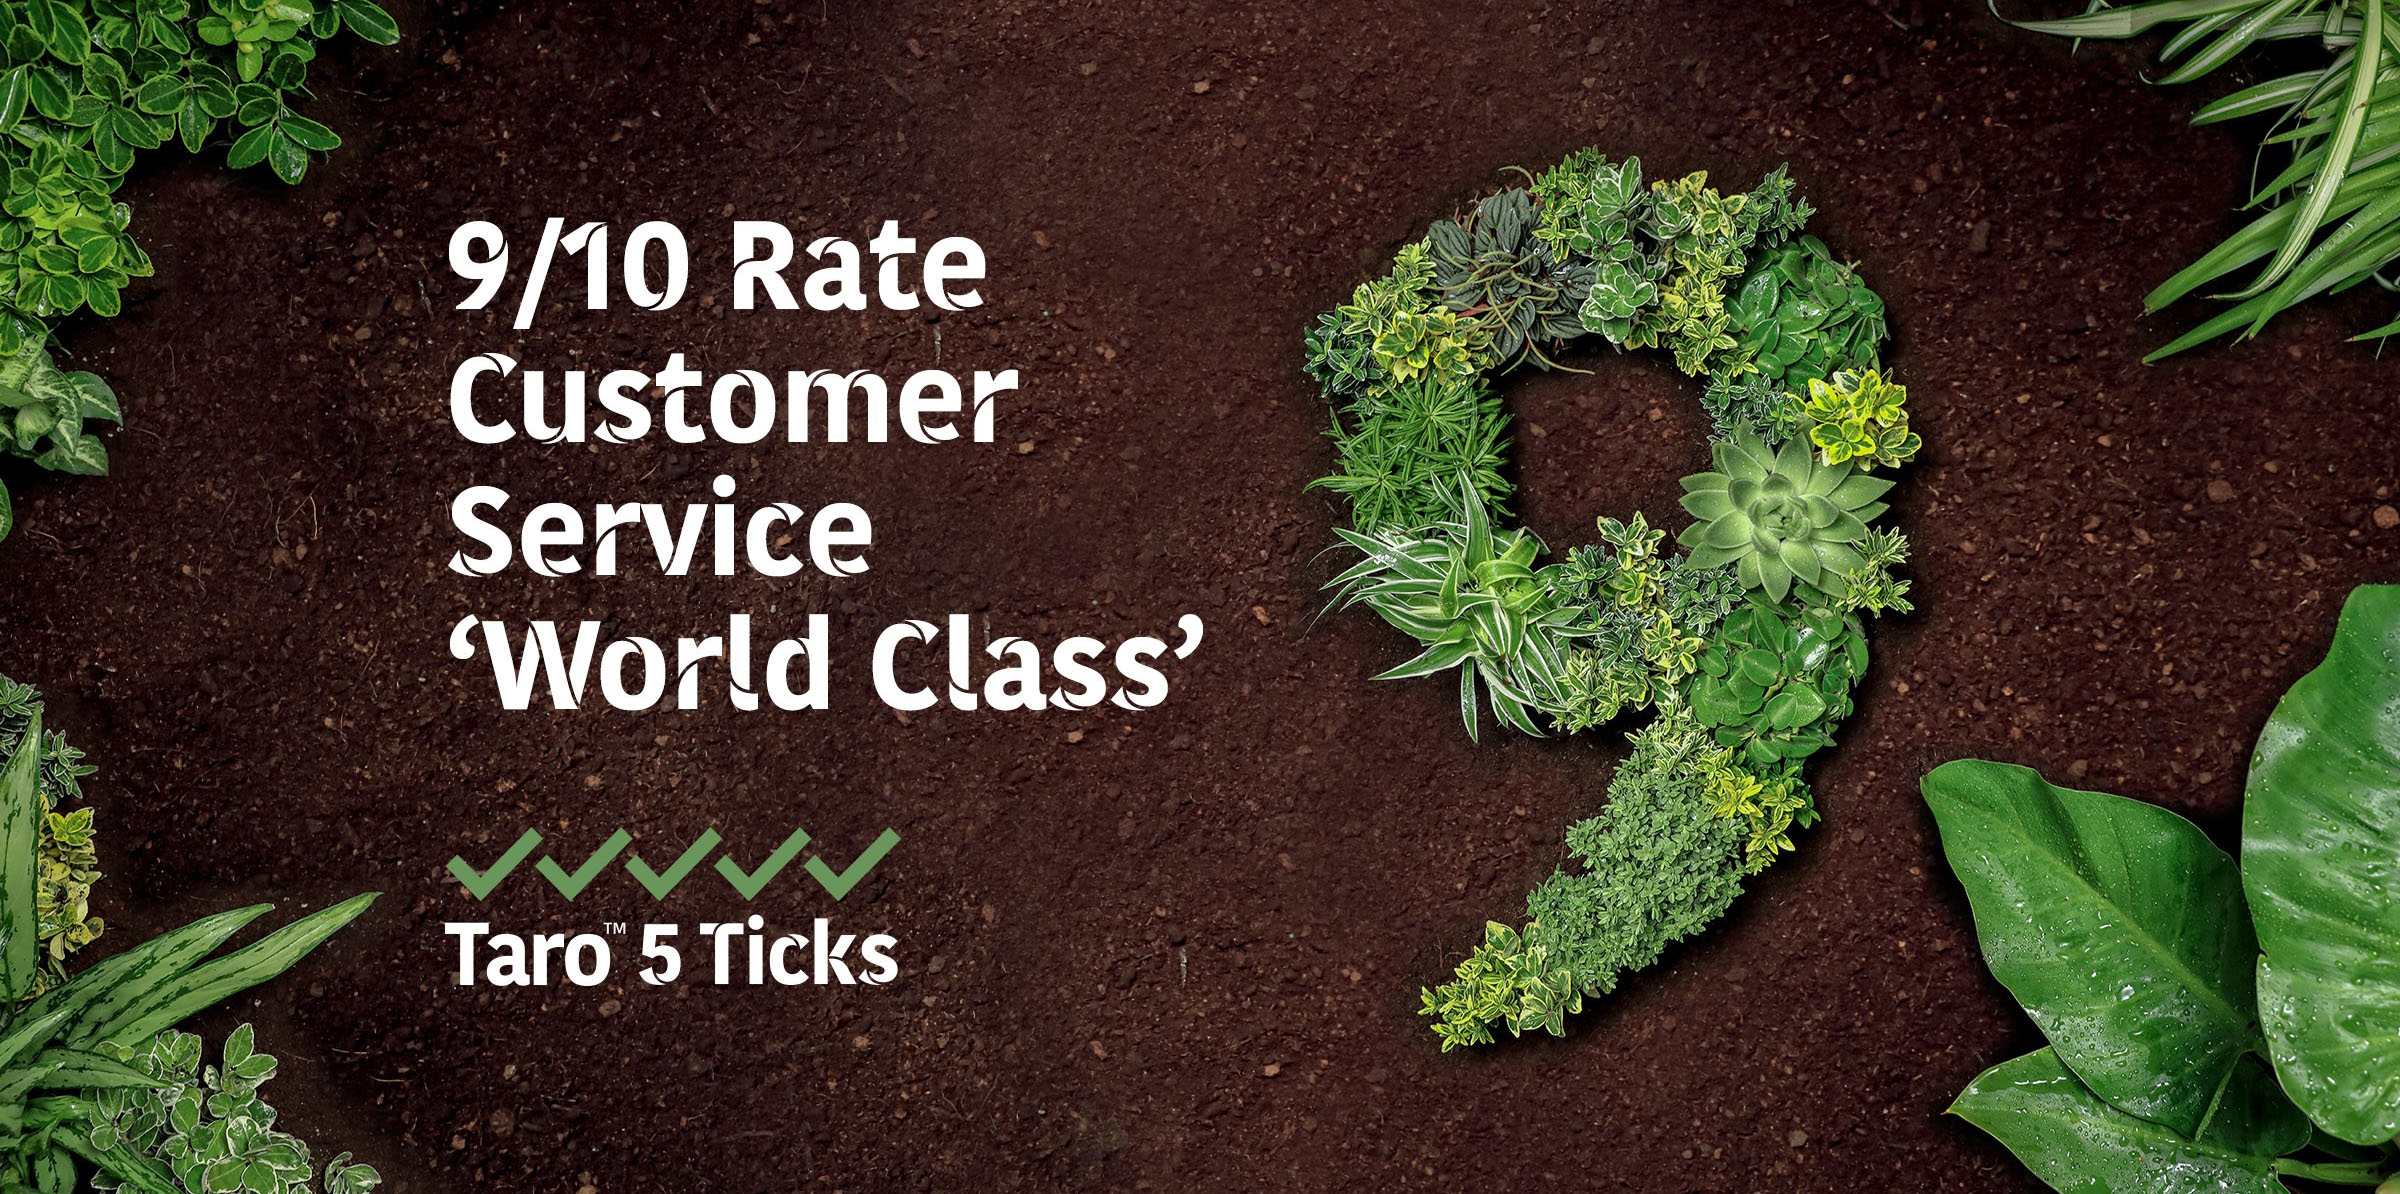 Taro Pumps 9 out of 10 Rate Customer Service World Class Banner